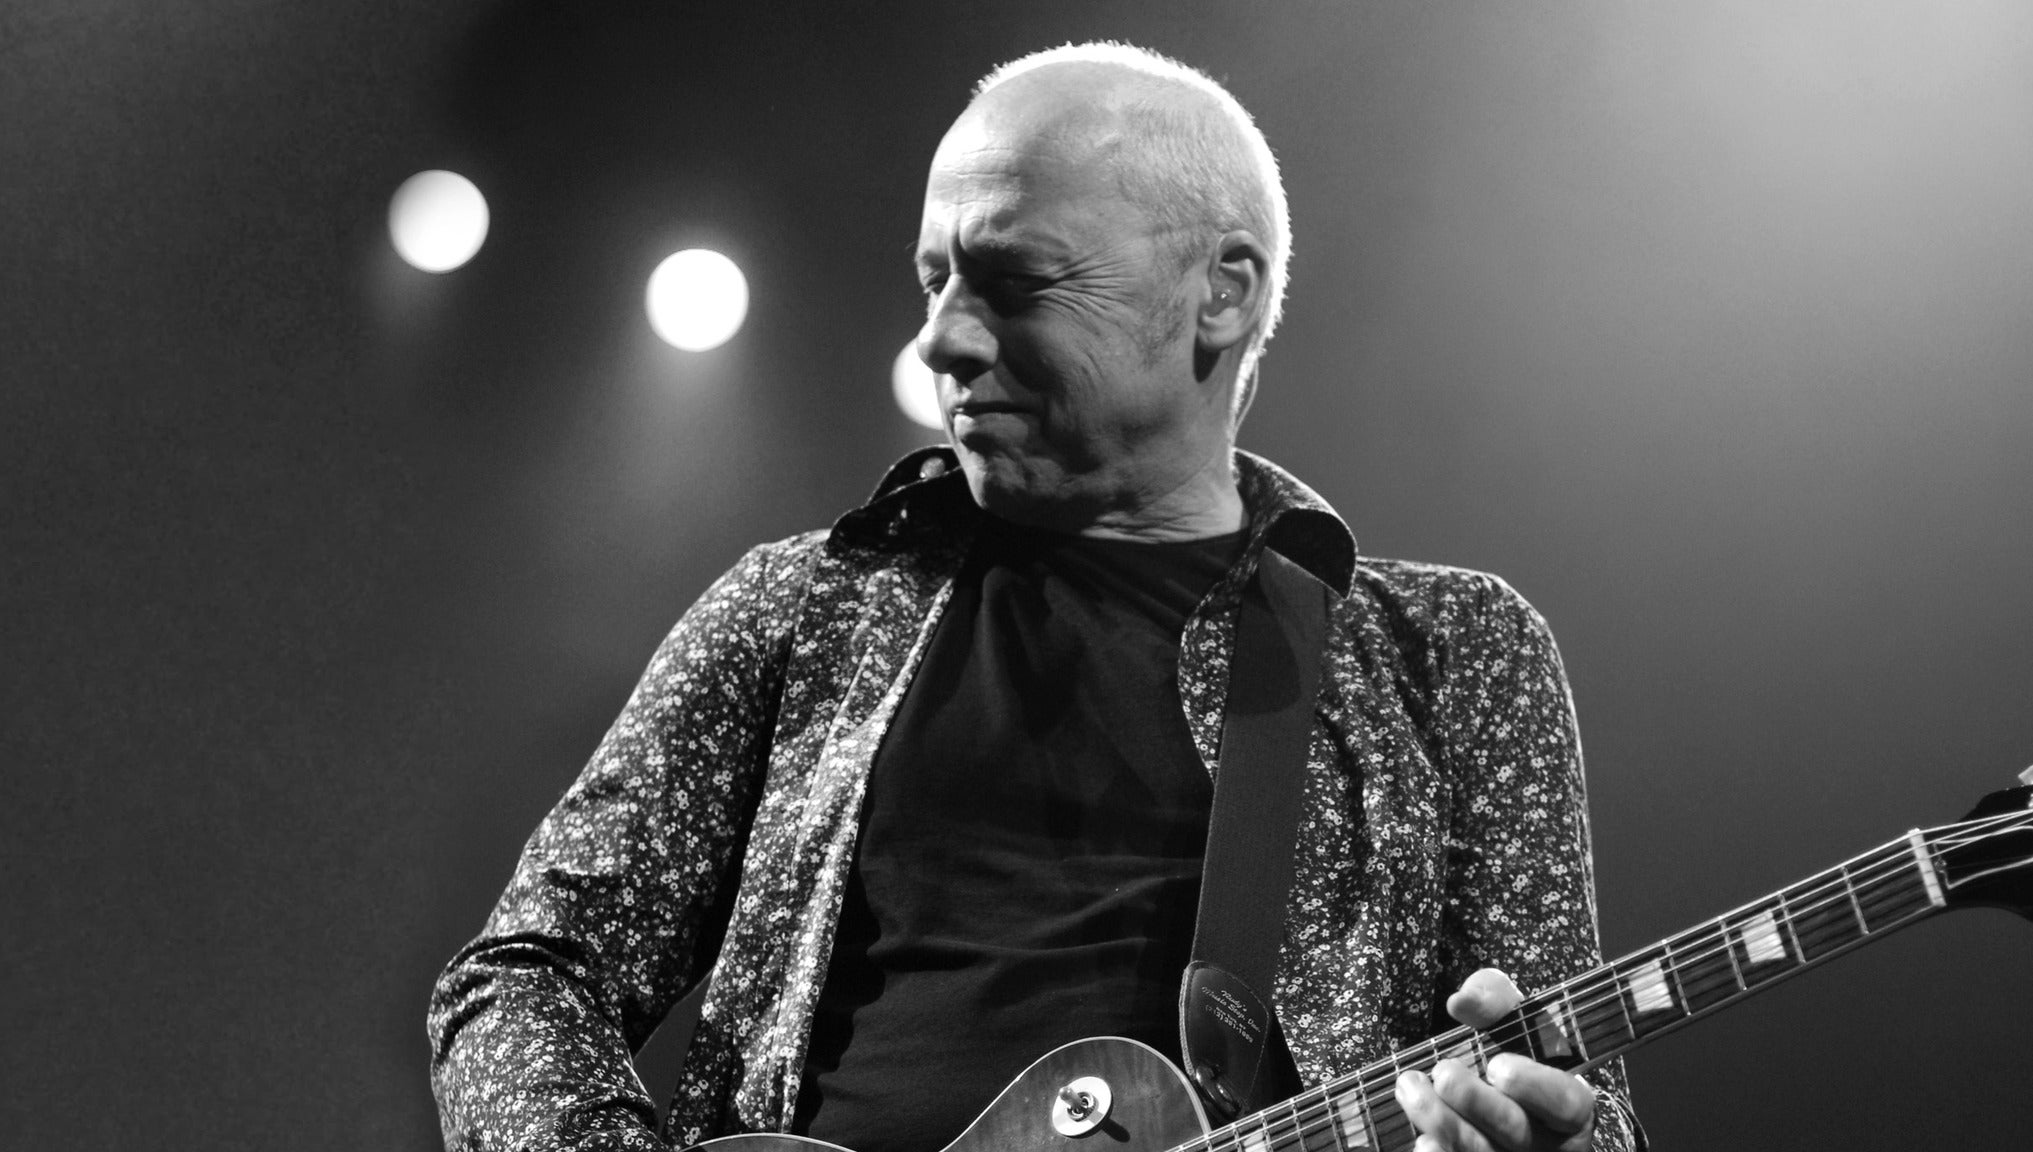 will mark knopfler tour in 2023